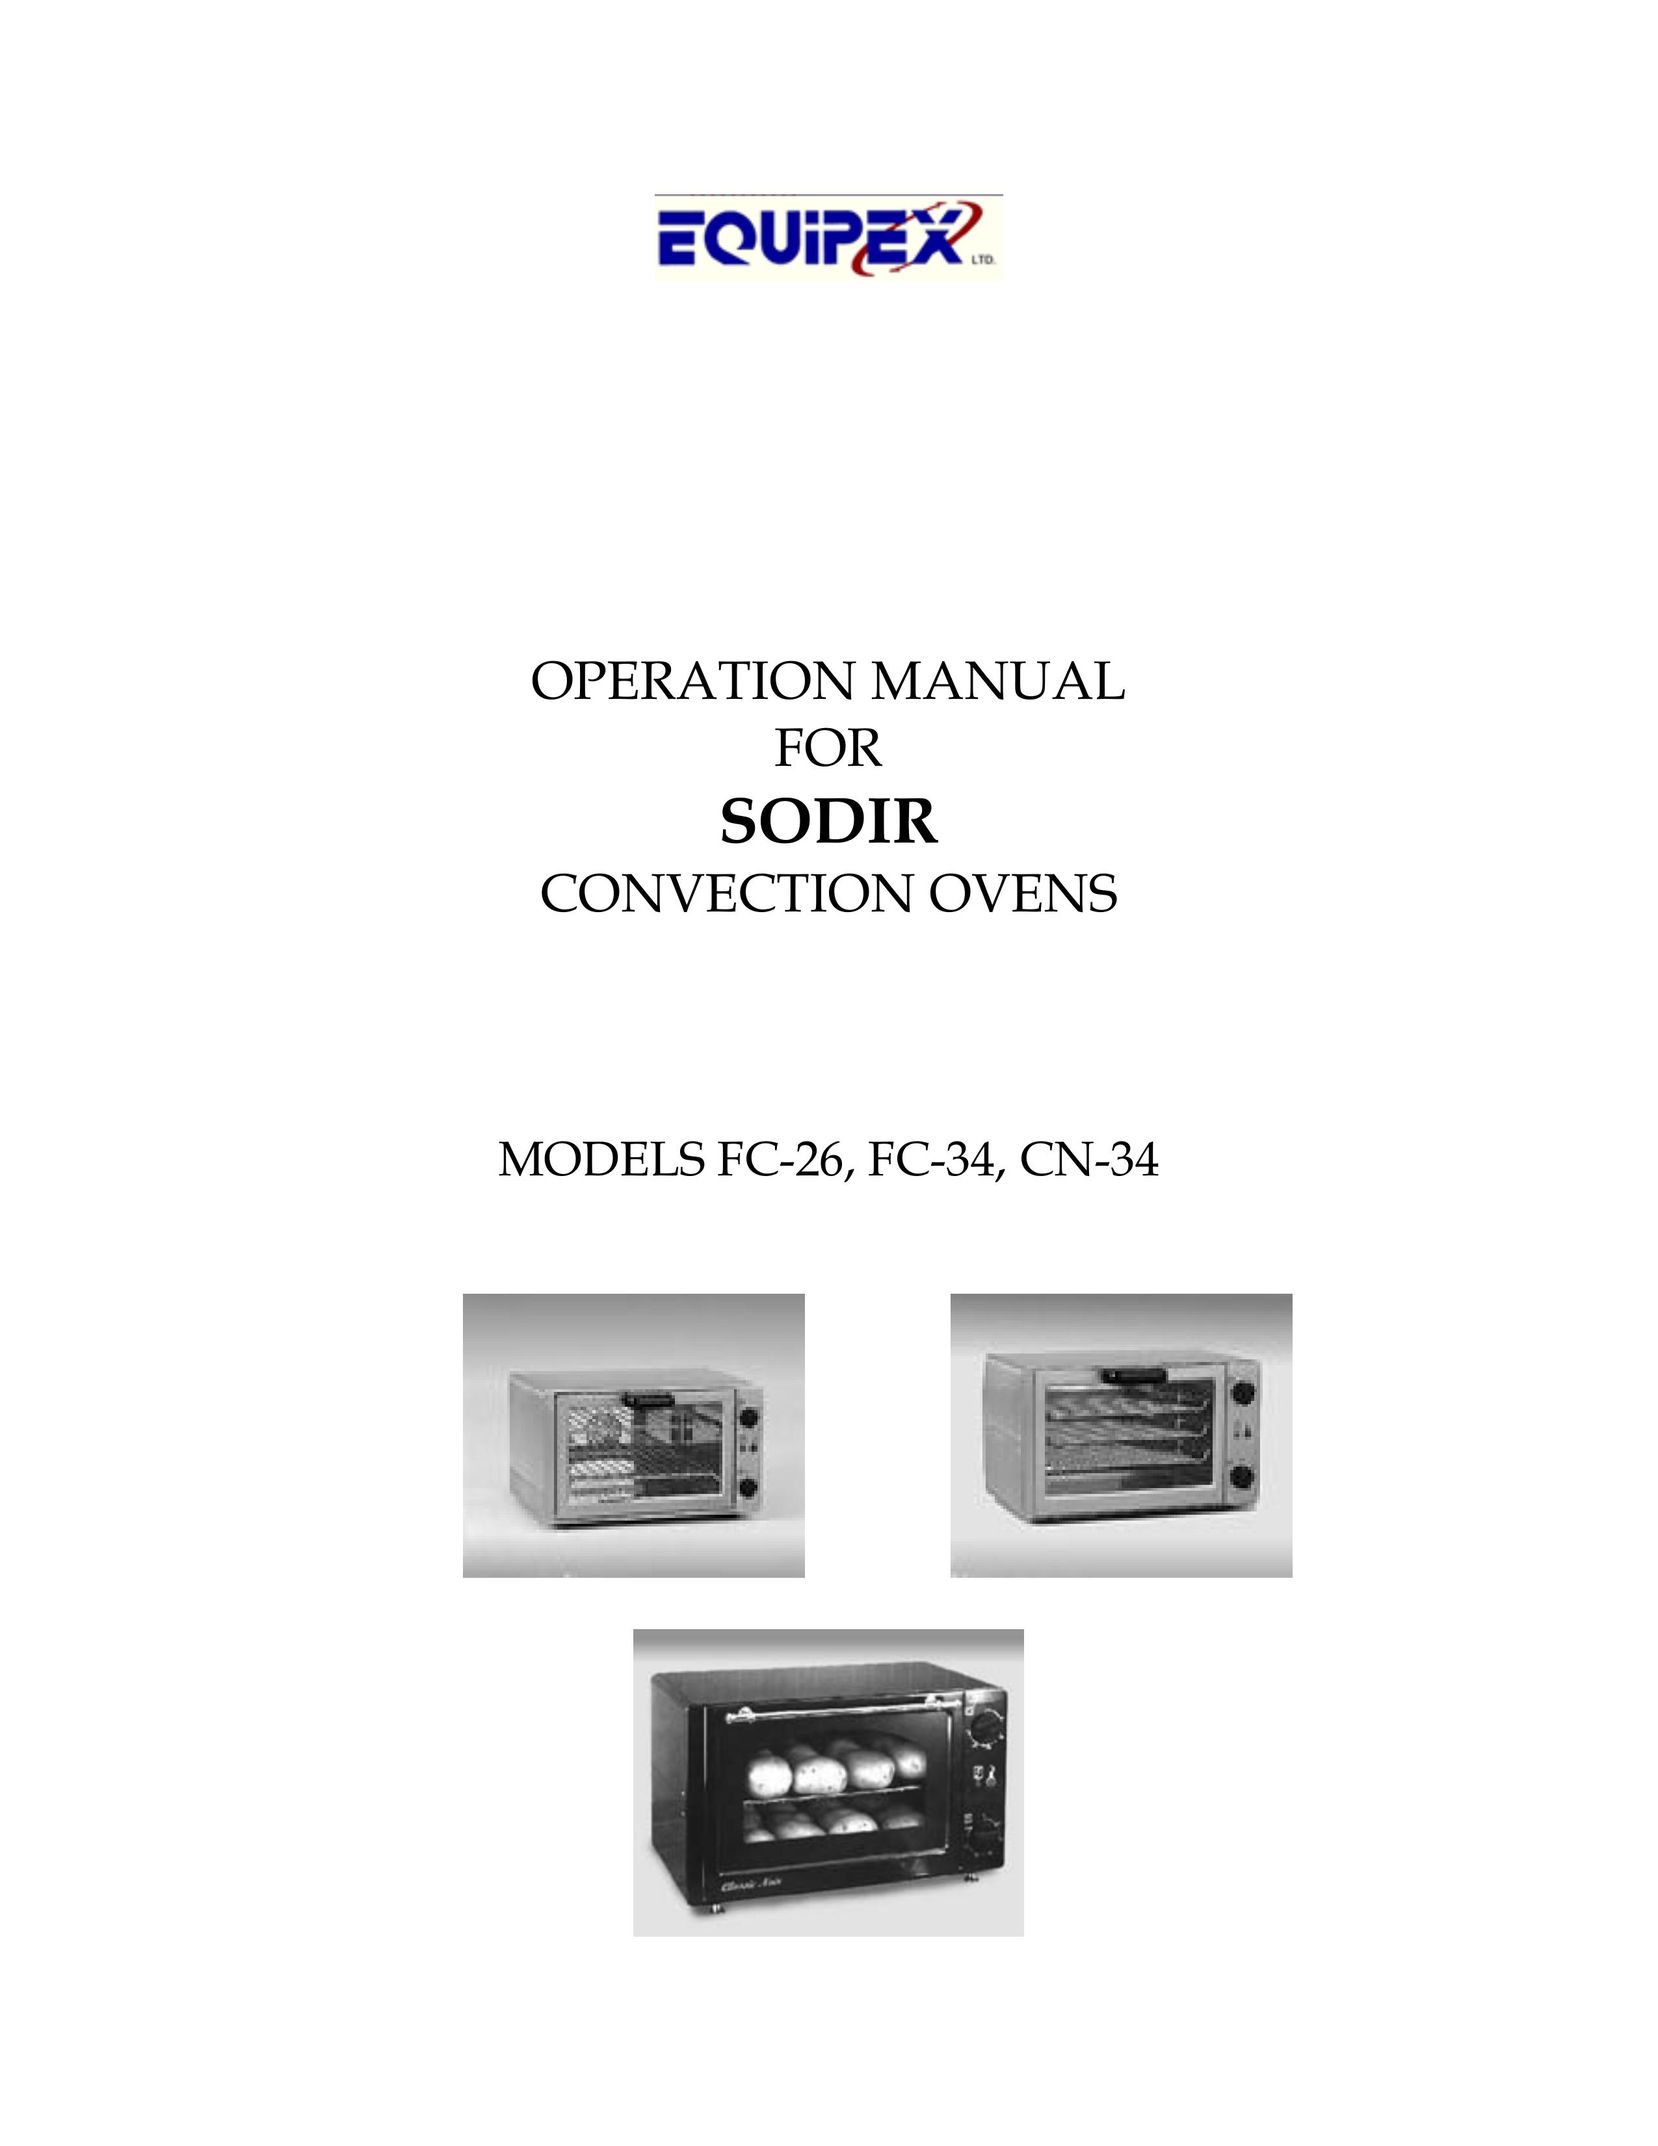 Equipex FC-26, FC-34, CN-34 Convection Oven User Manual